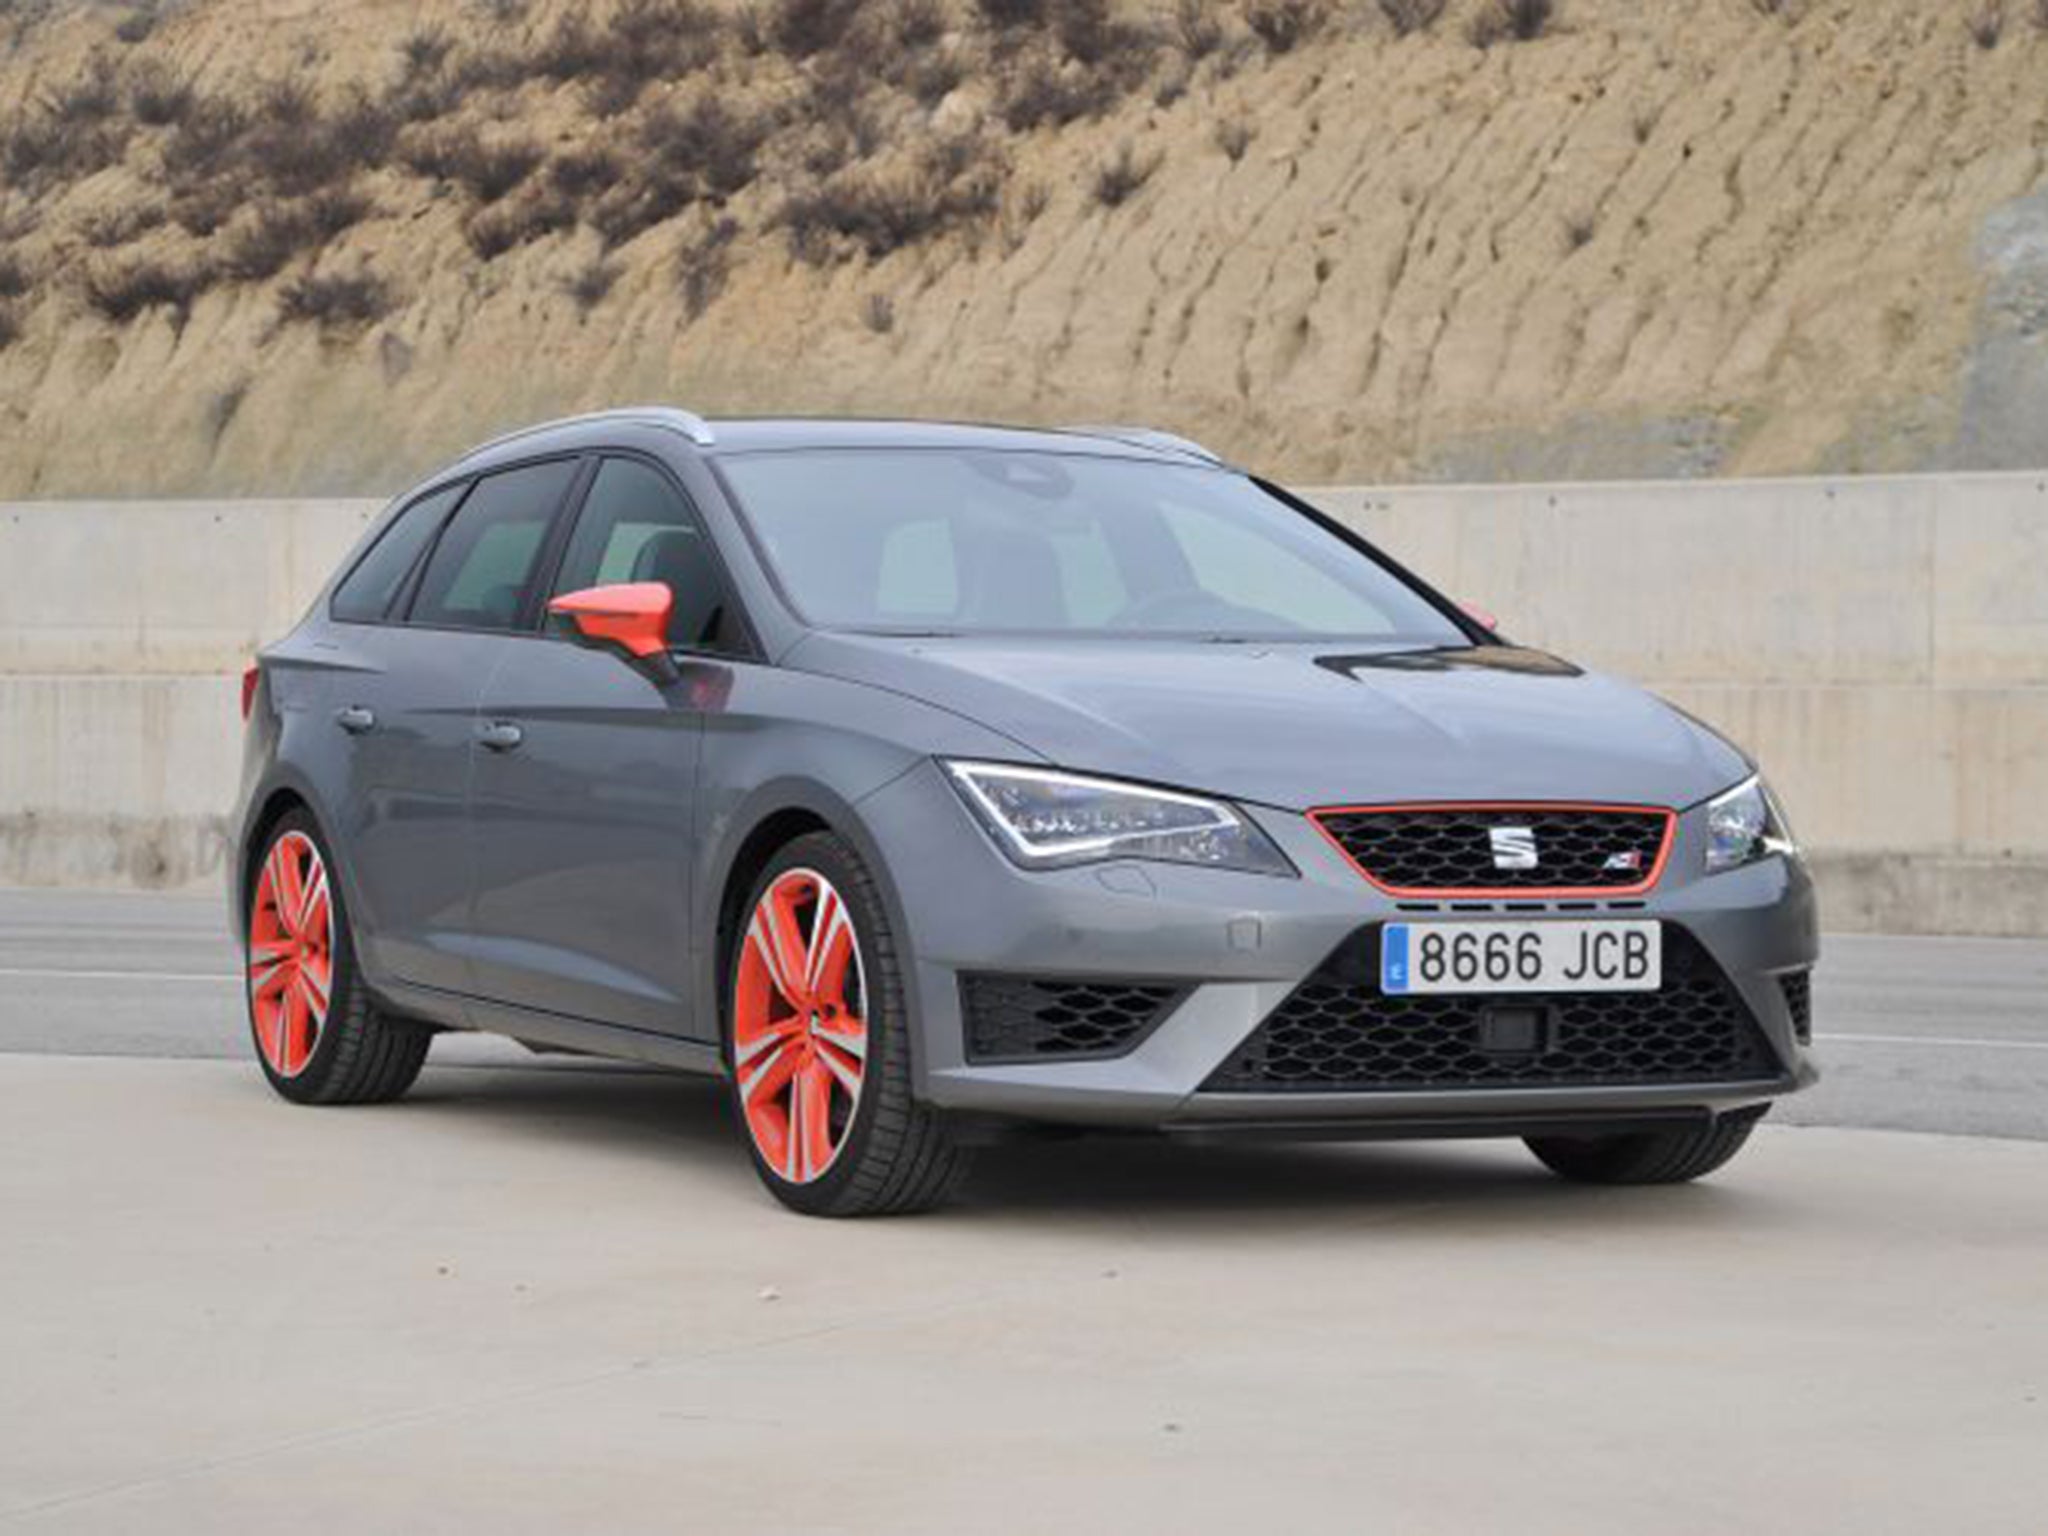 The Seat Leon ST Cupra is kitted out with an impressive 280 horsepower